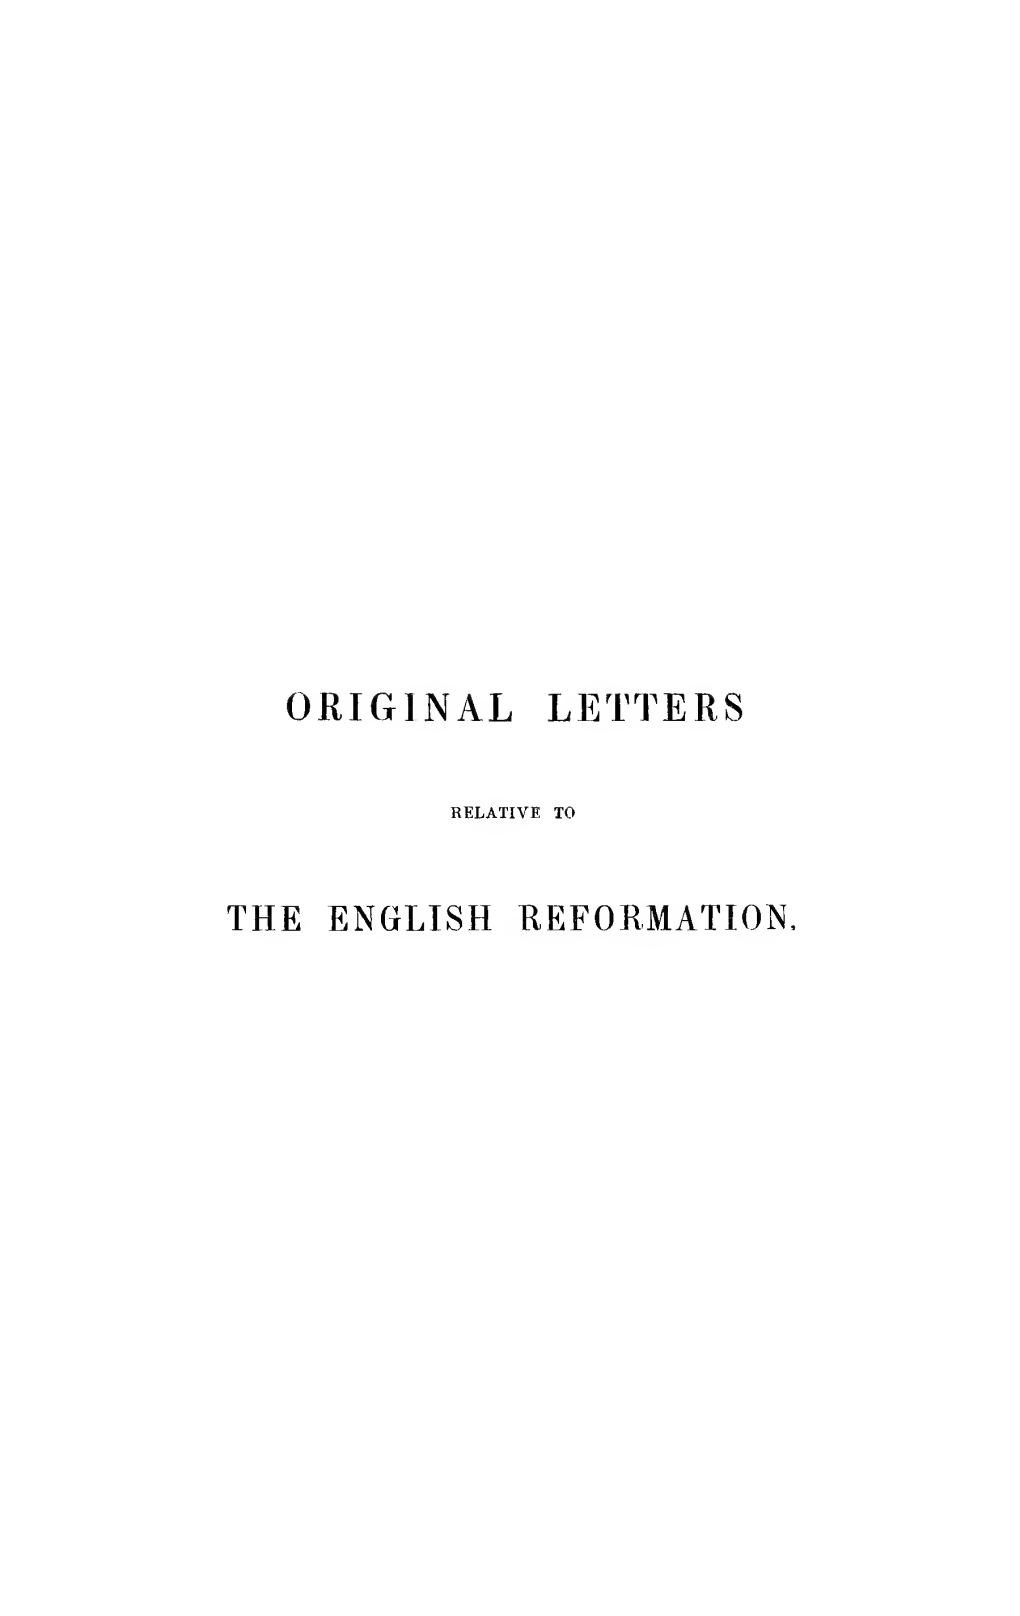 Original Letters Relative to the English Reformation [Electronic